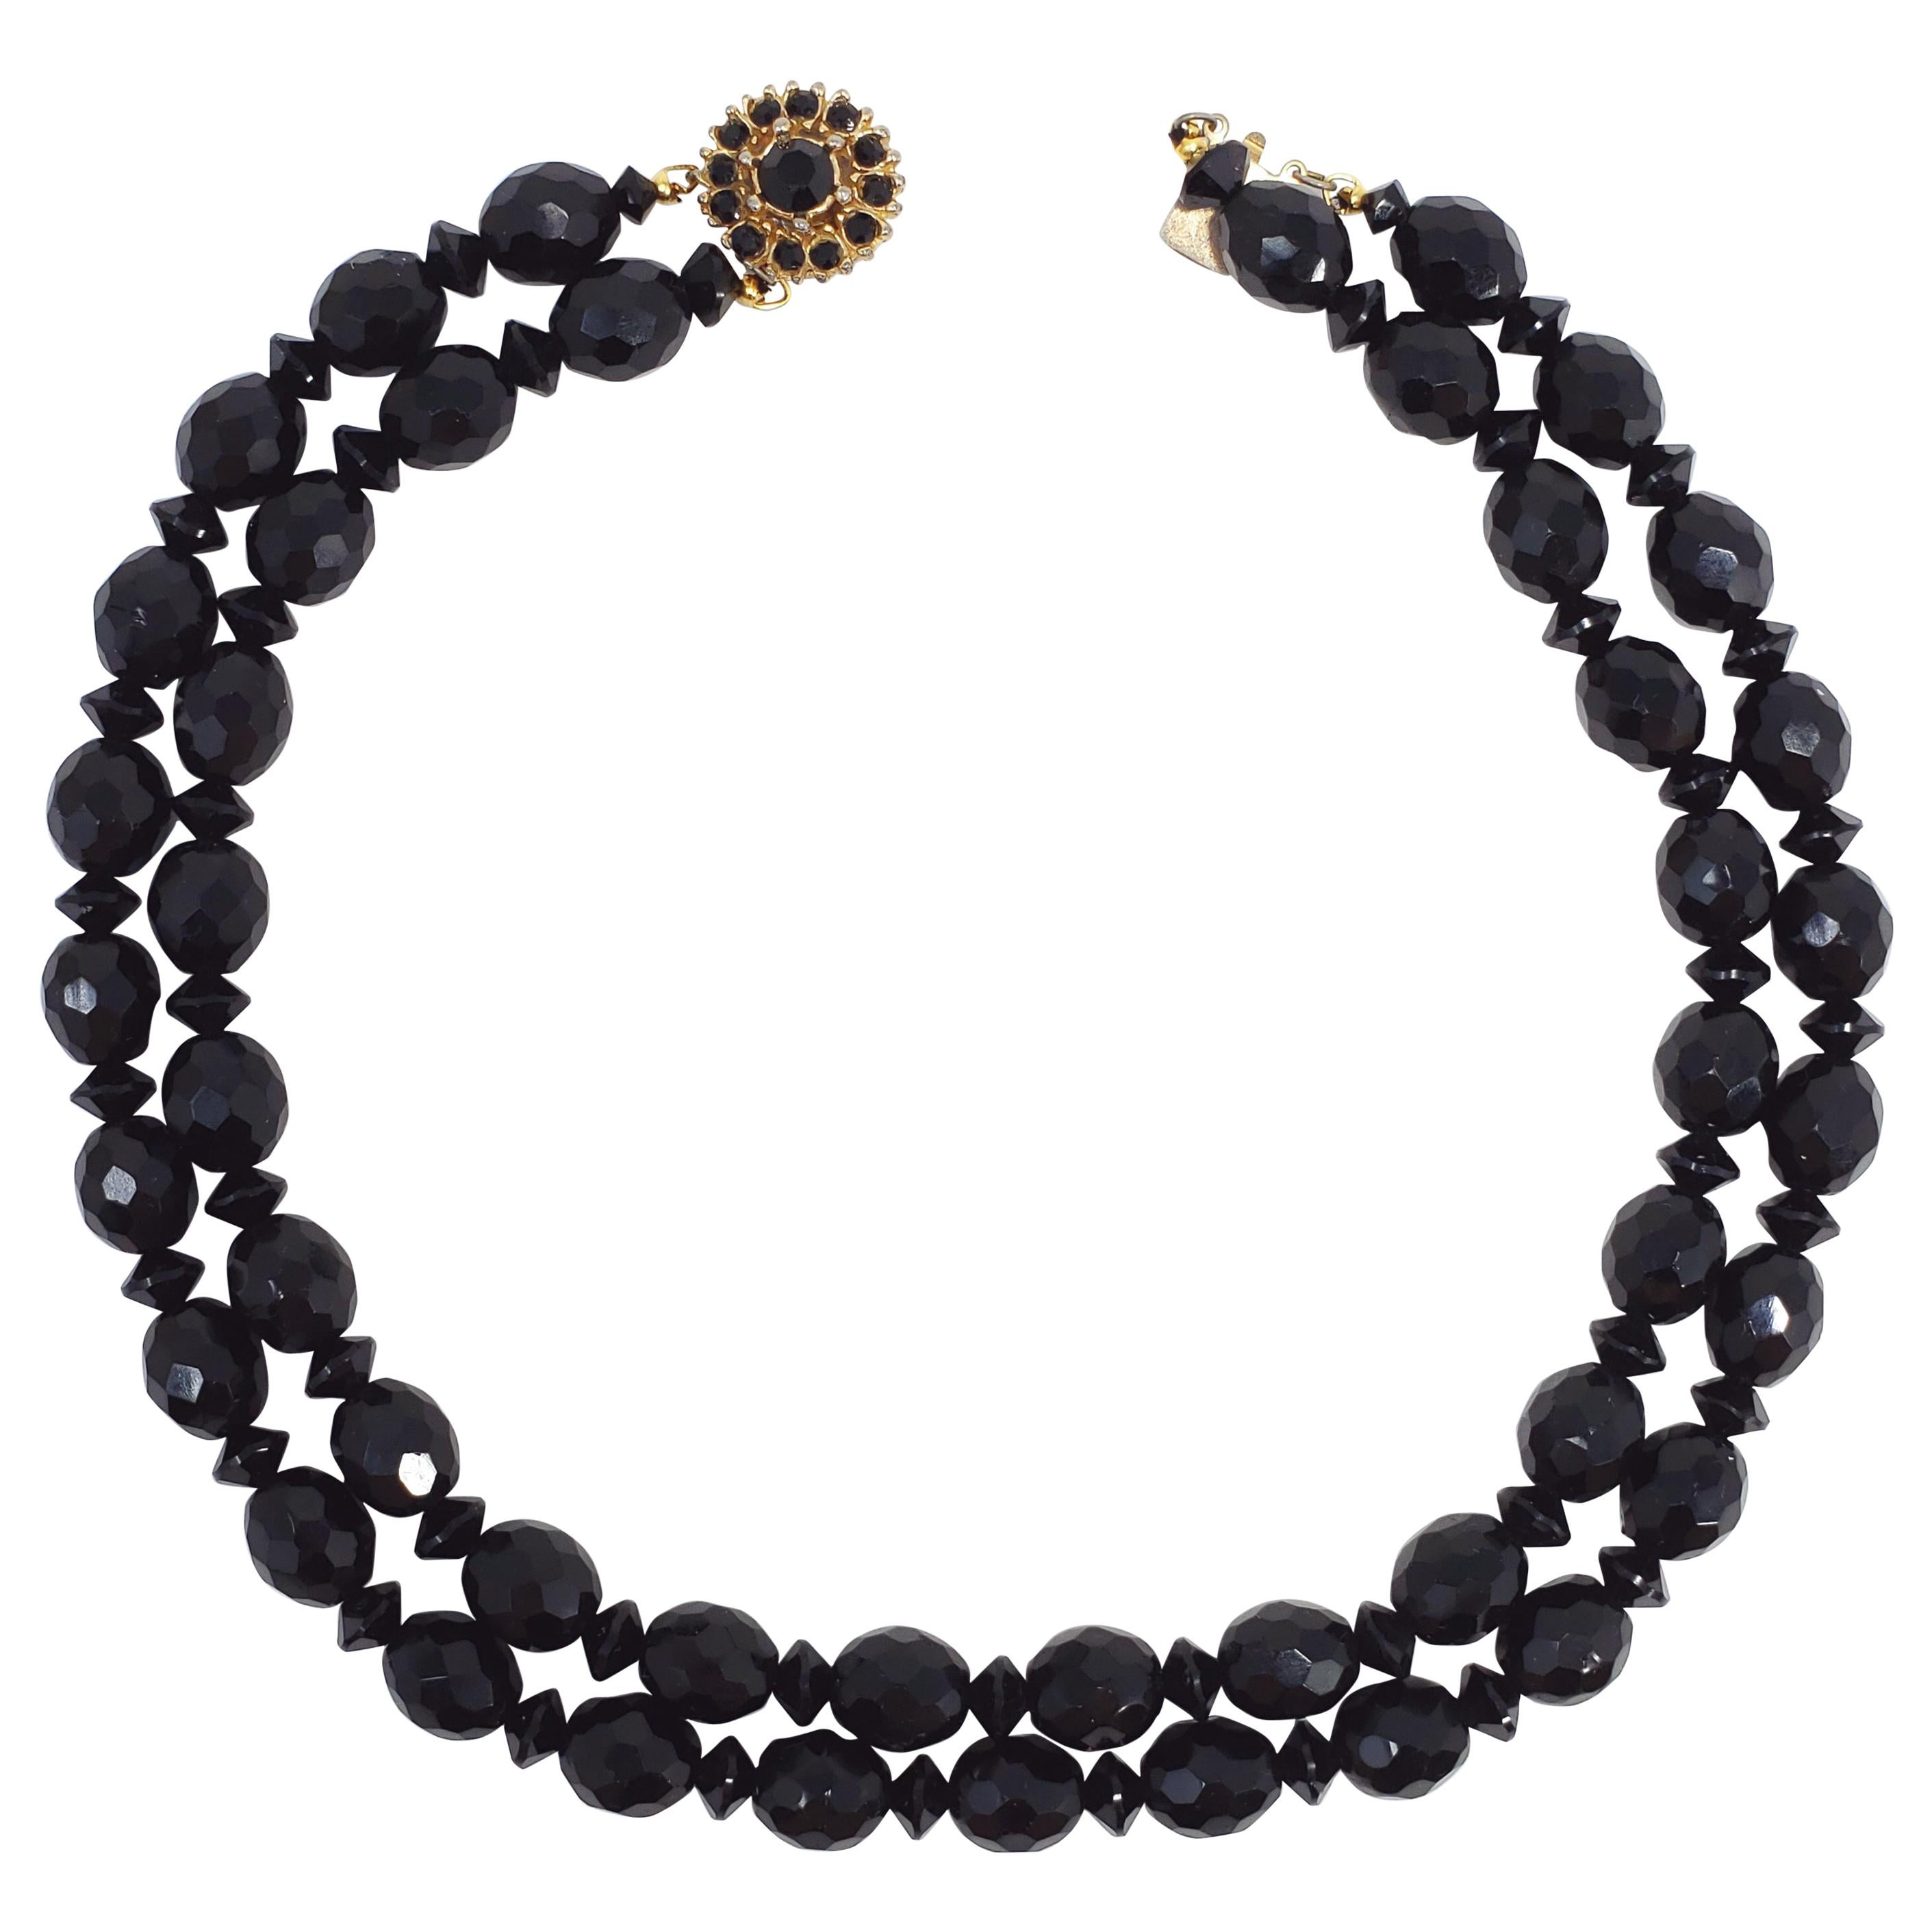 Bergere Black Faceted Jet Double Strand Necklace, Gold Plated Clasp, 1960s